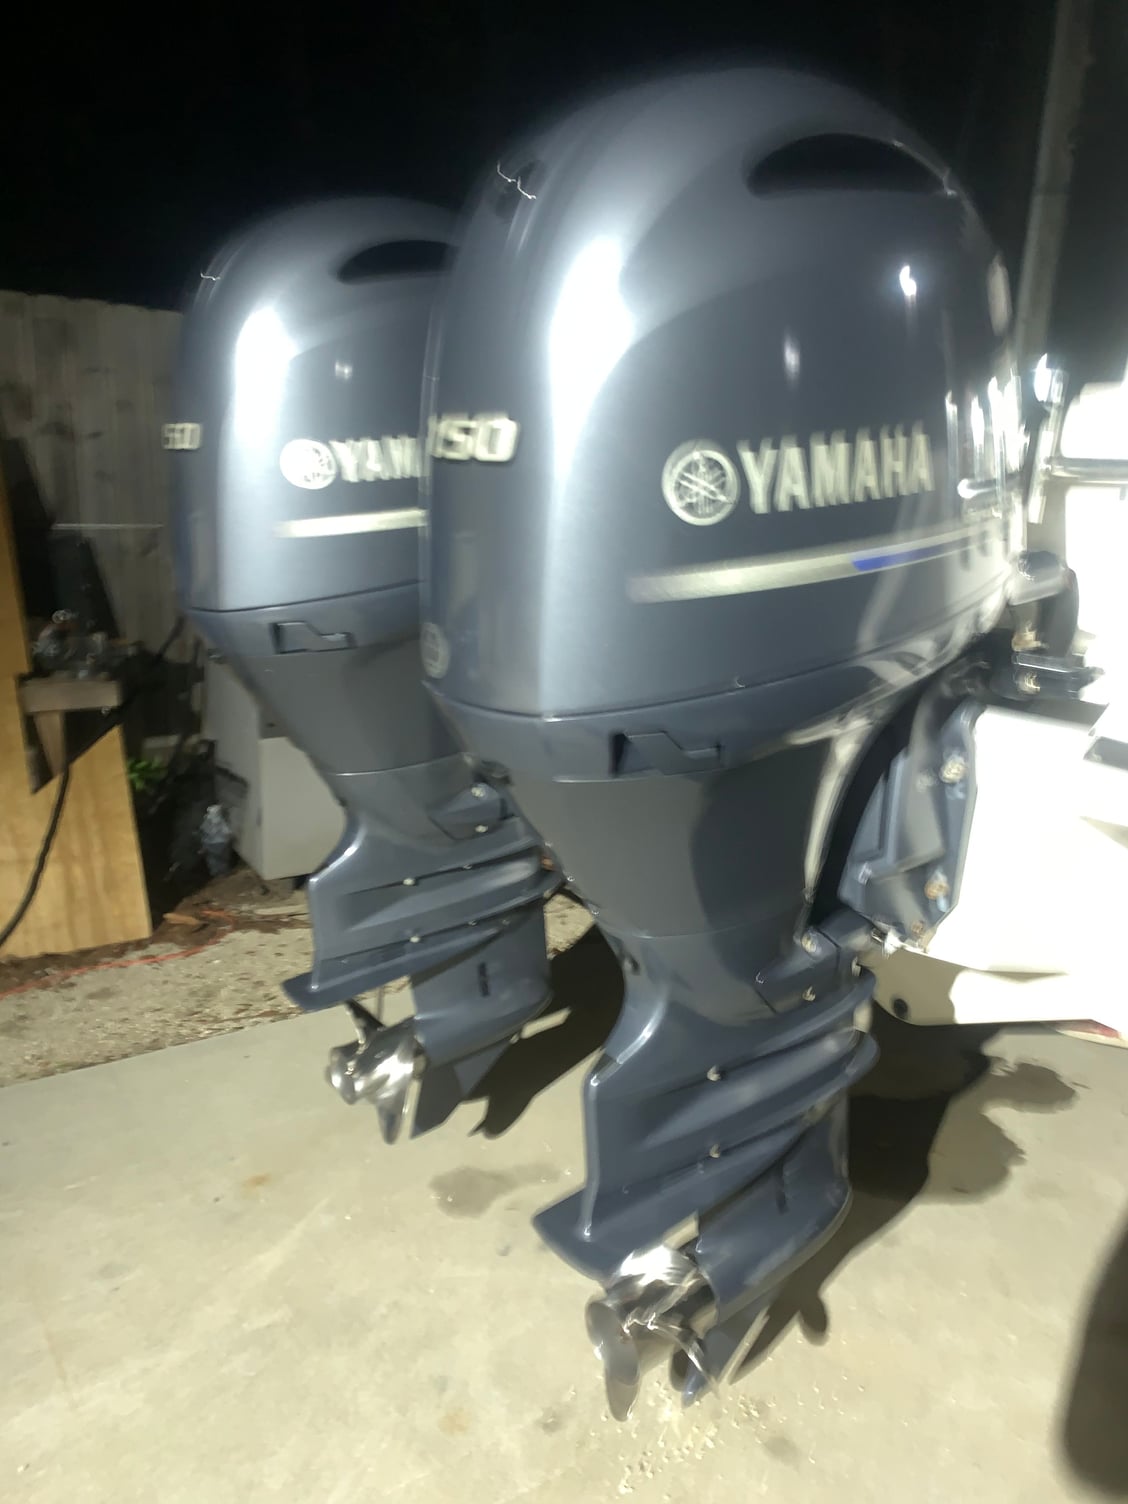 Pair of 2017 Yamaha F150 outboards 25” with 320 hours $18000 - The Hull